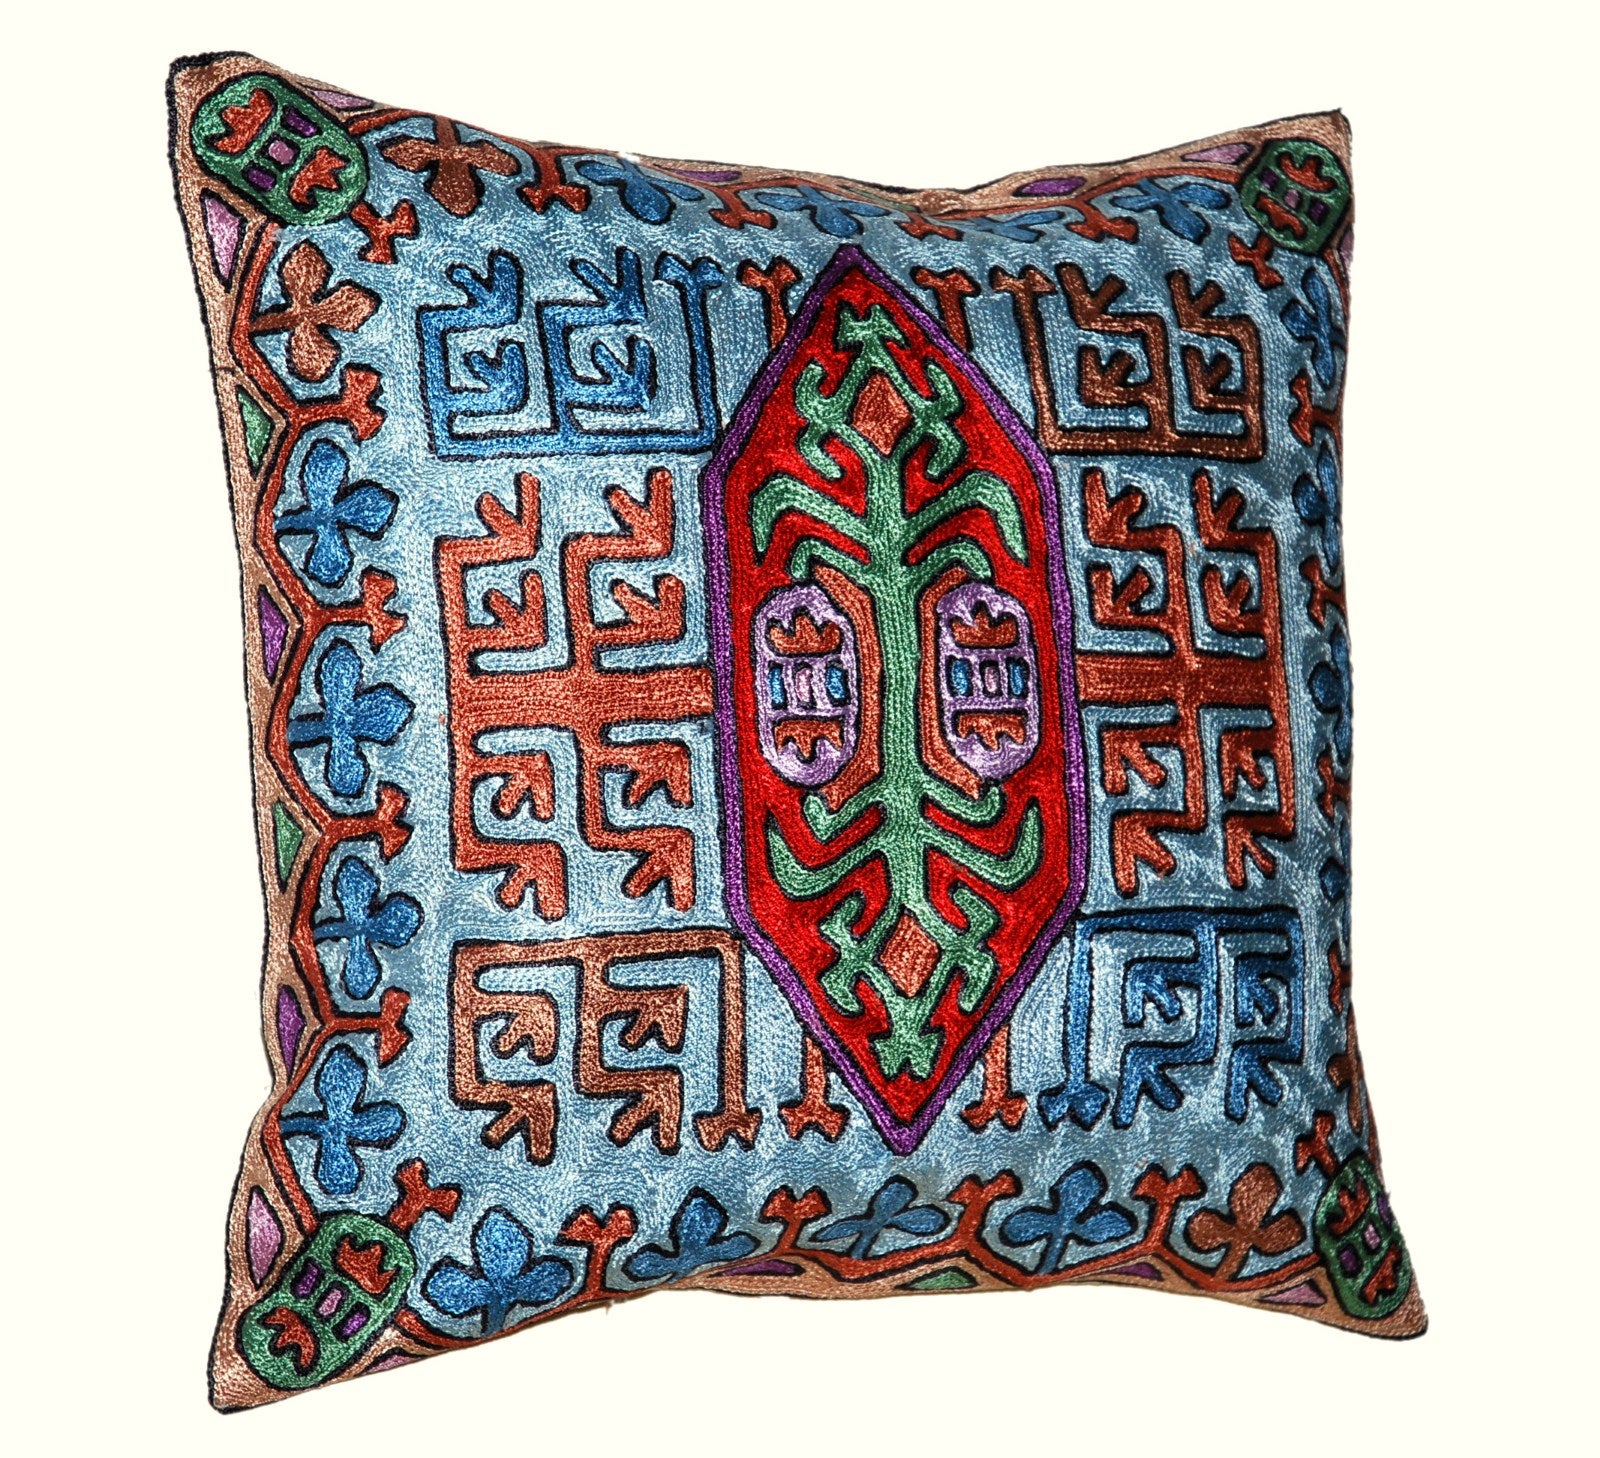 Crewel Silk Embroidered Cushion Throw Pillow Cover, Multicolor #CW2014